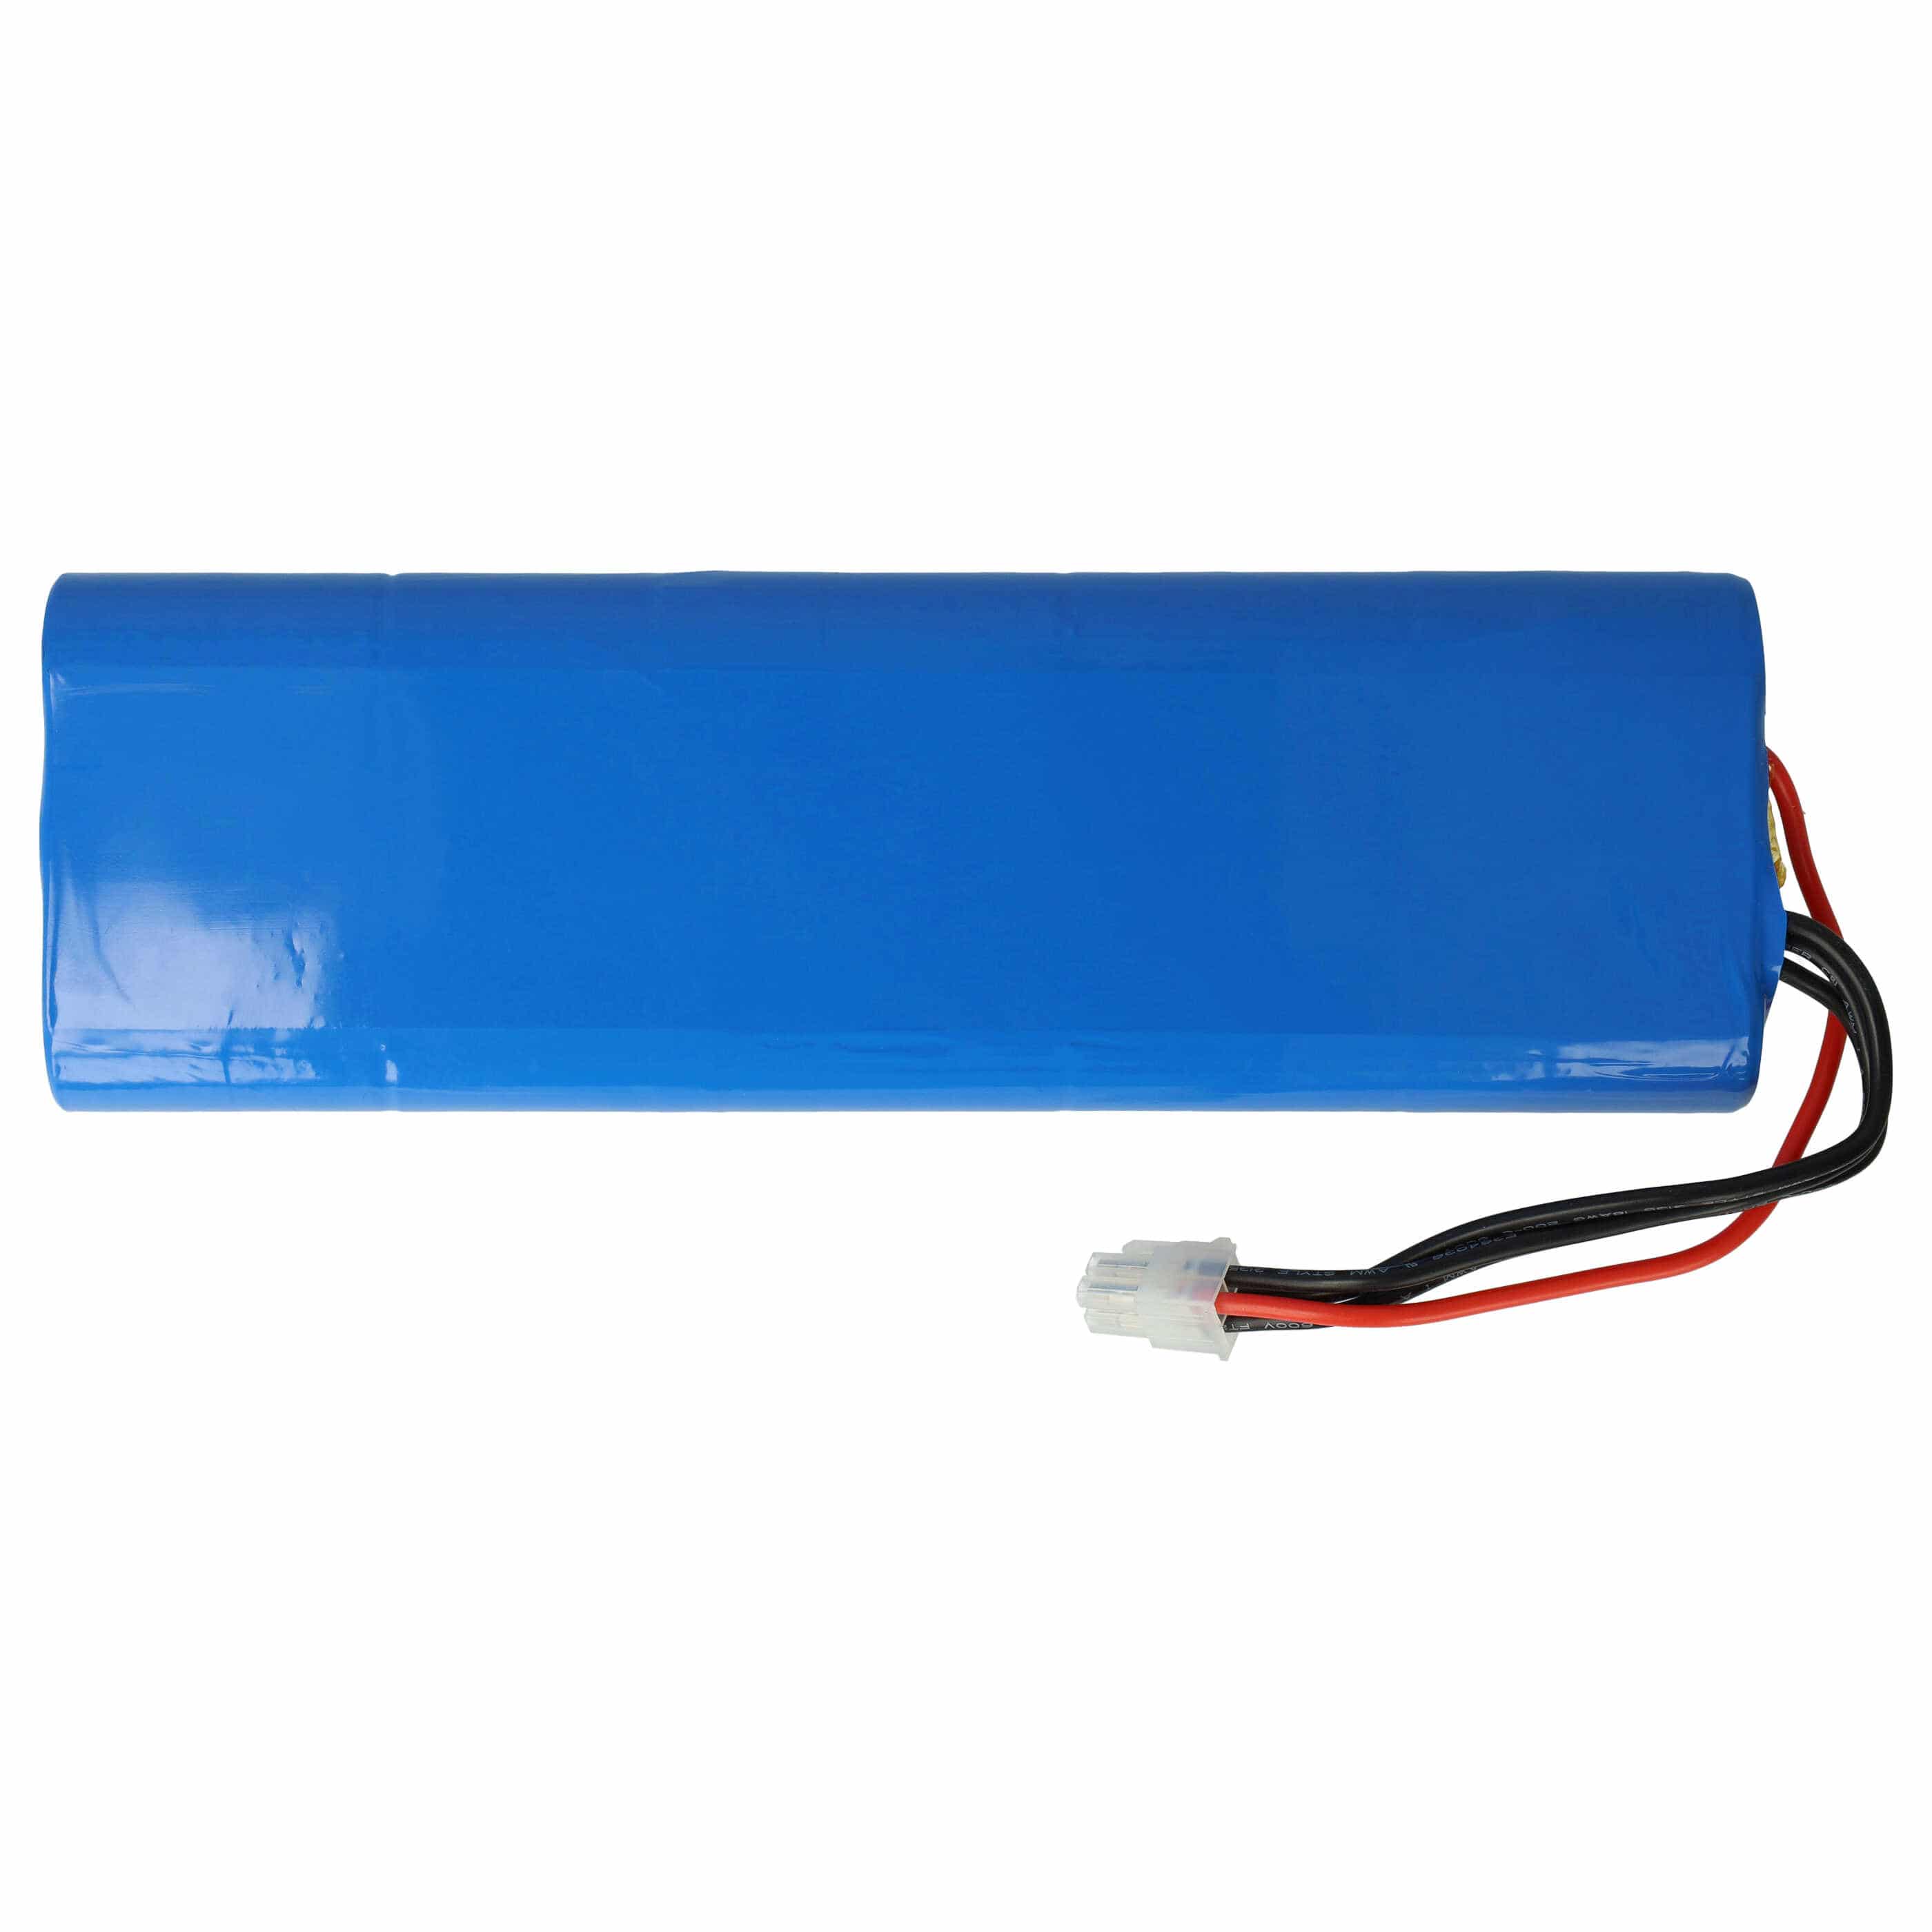 Lawnmower Battery (2 Units) Replacement for 112862101 - 4500mAh 18V NiMH